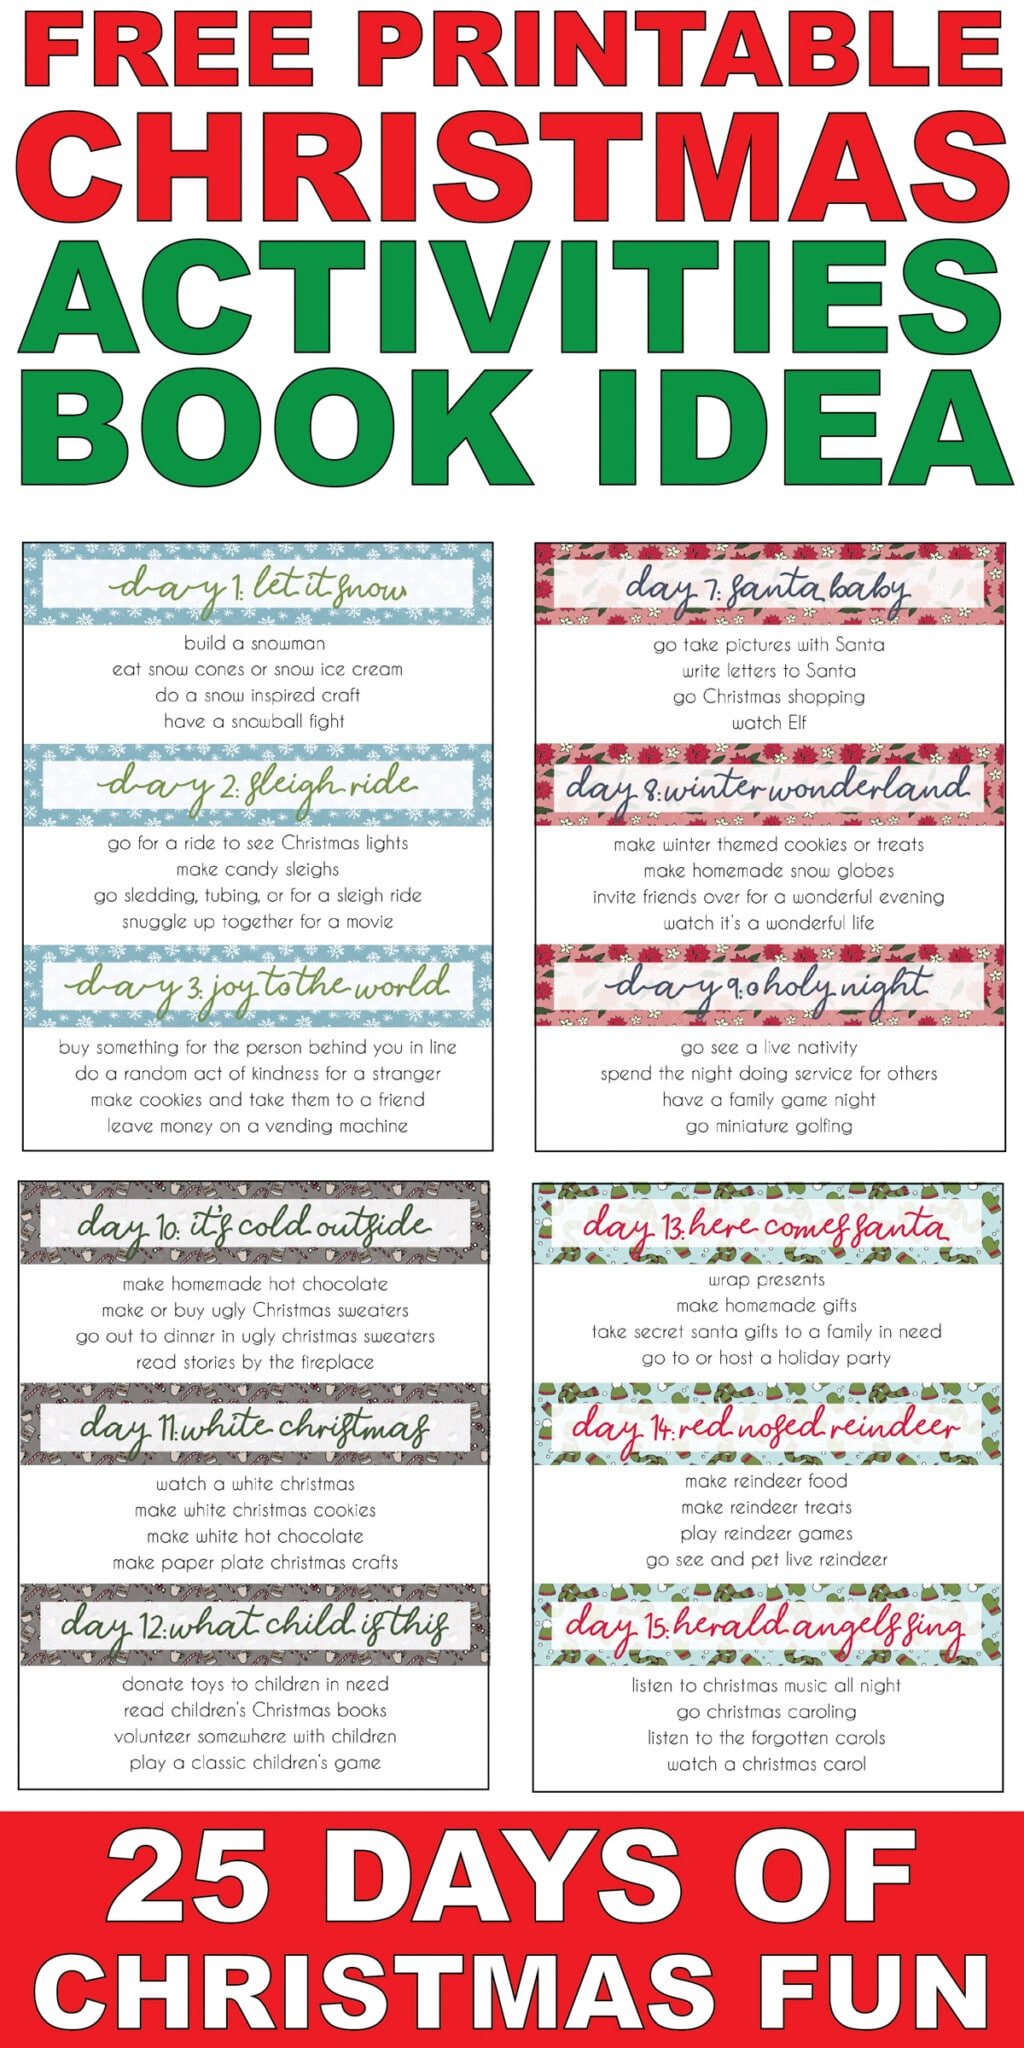 Free printable Christmas activities for families book! Perfect for kids, for teens, and even for adults or couples with no kids! Over 100 fun activities to do during the Christmas season - one to choose each day like a Christmas activities countdown! 